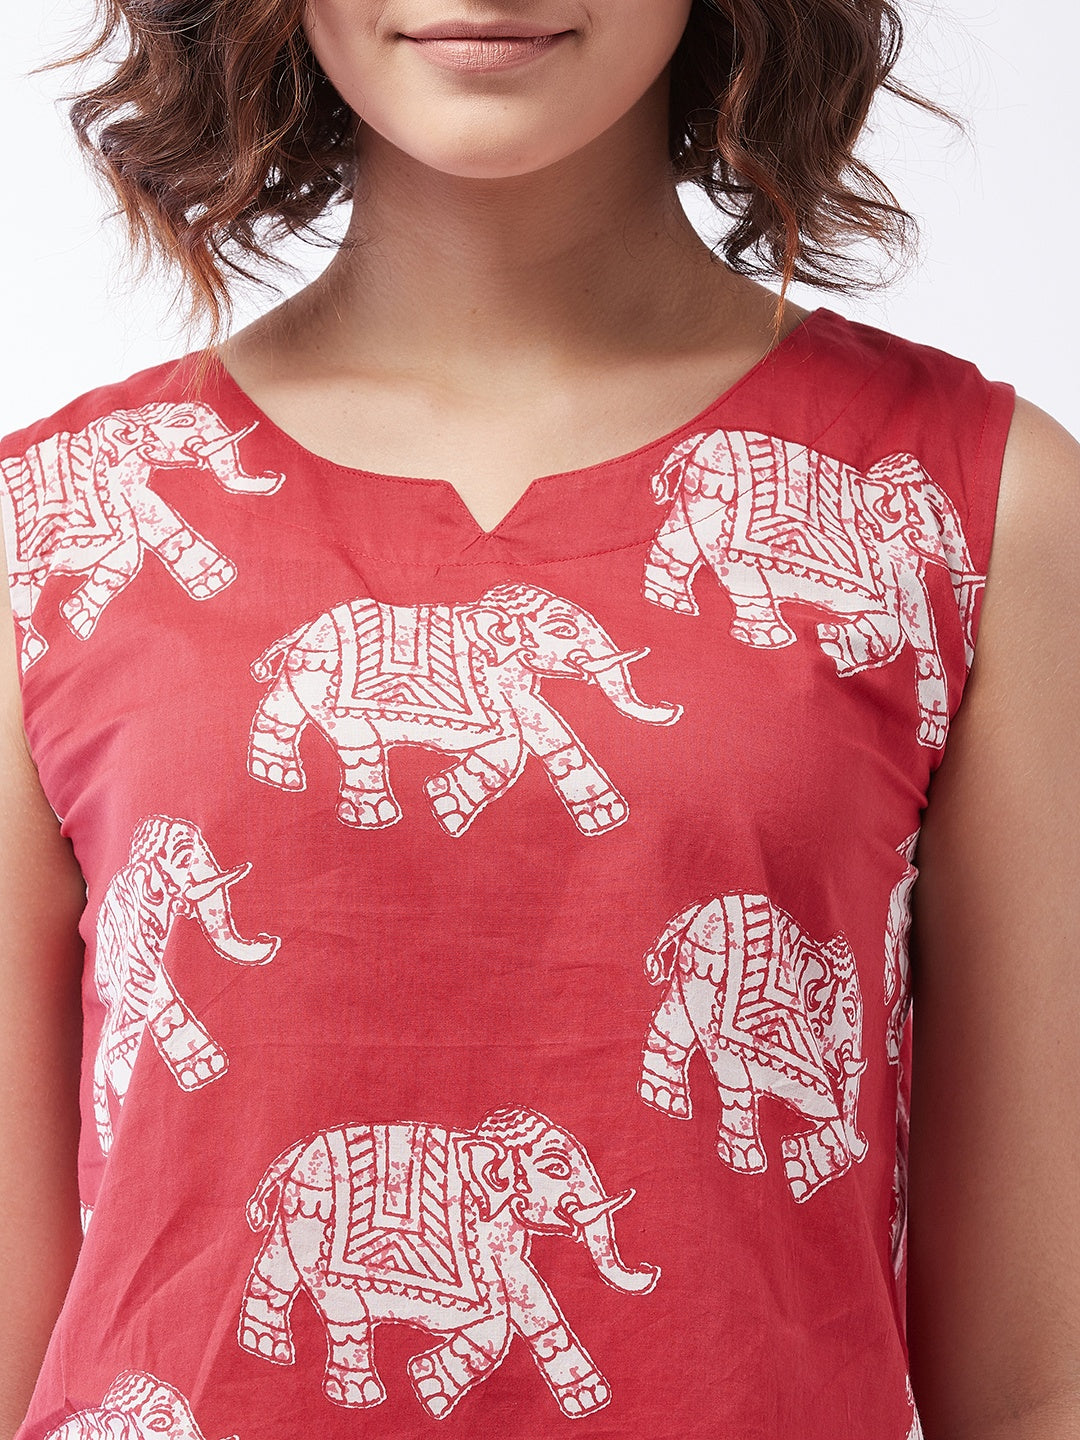 Red Elephant Sleeveless Top For Teens